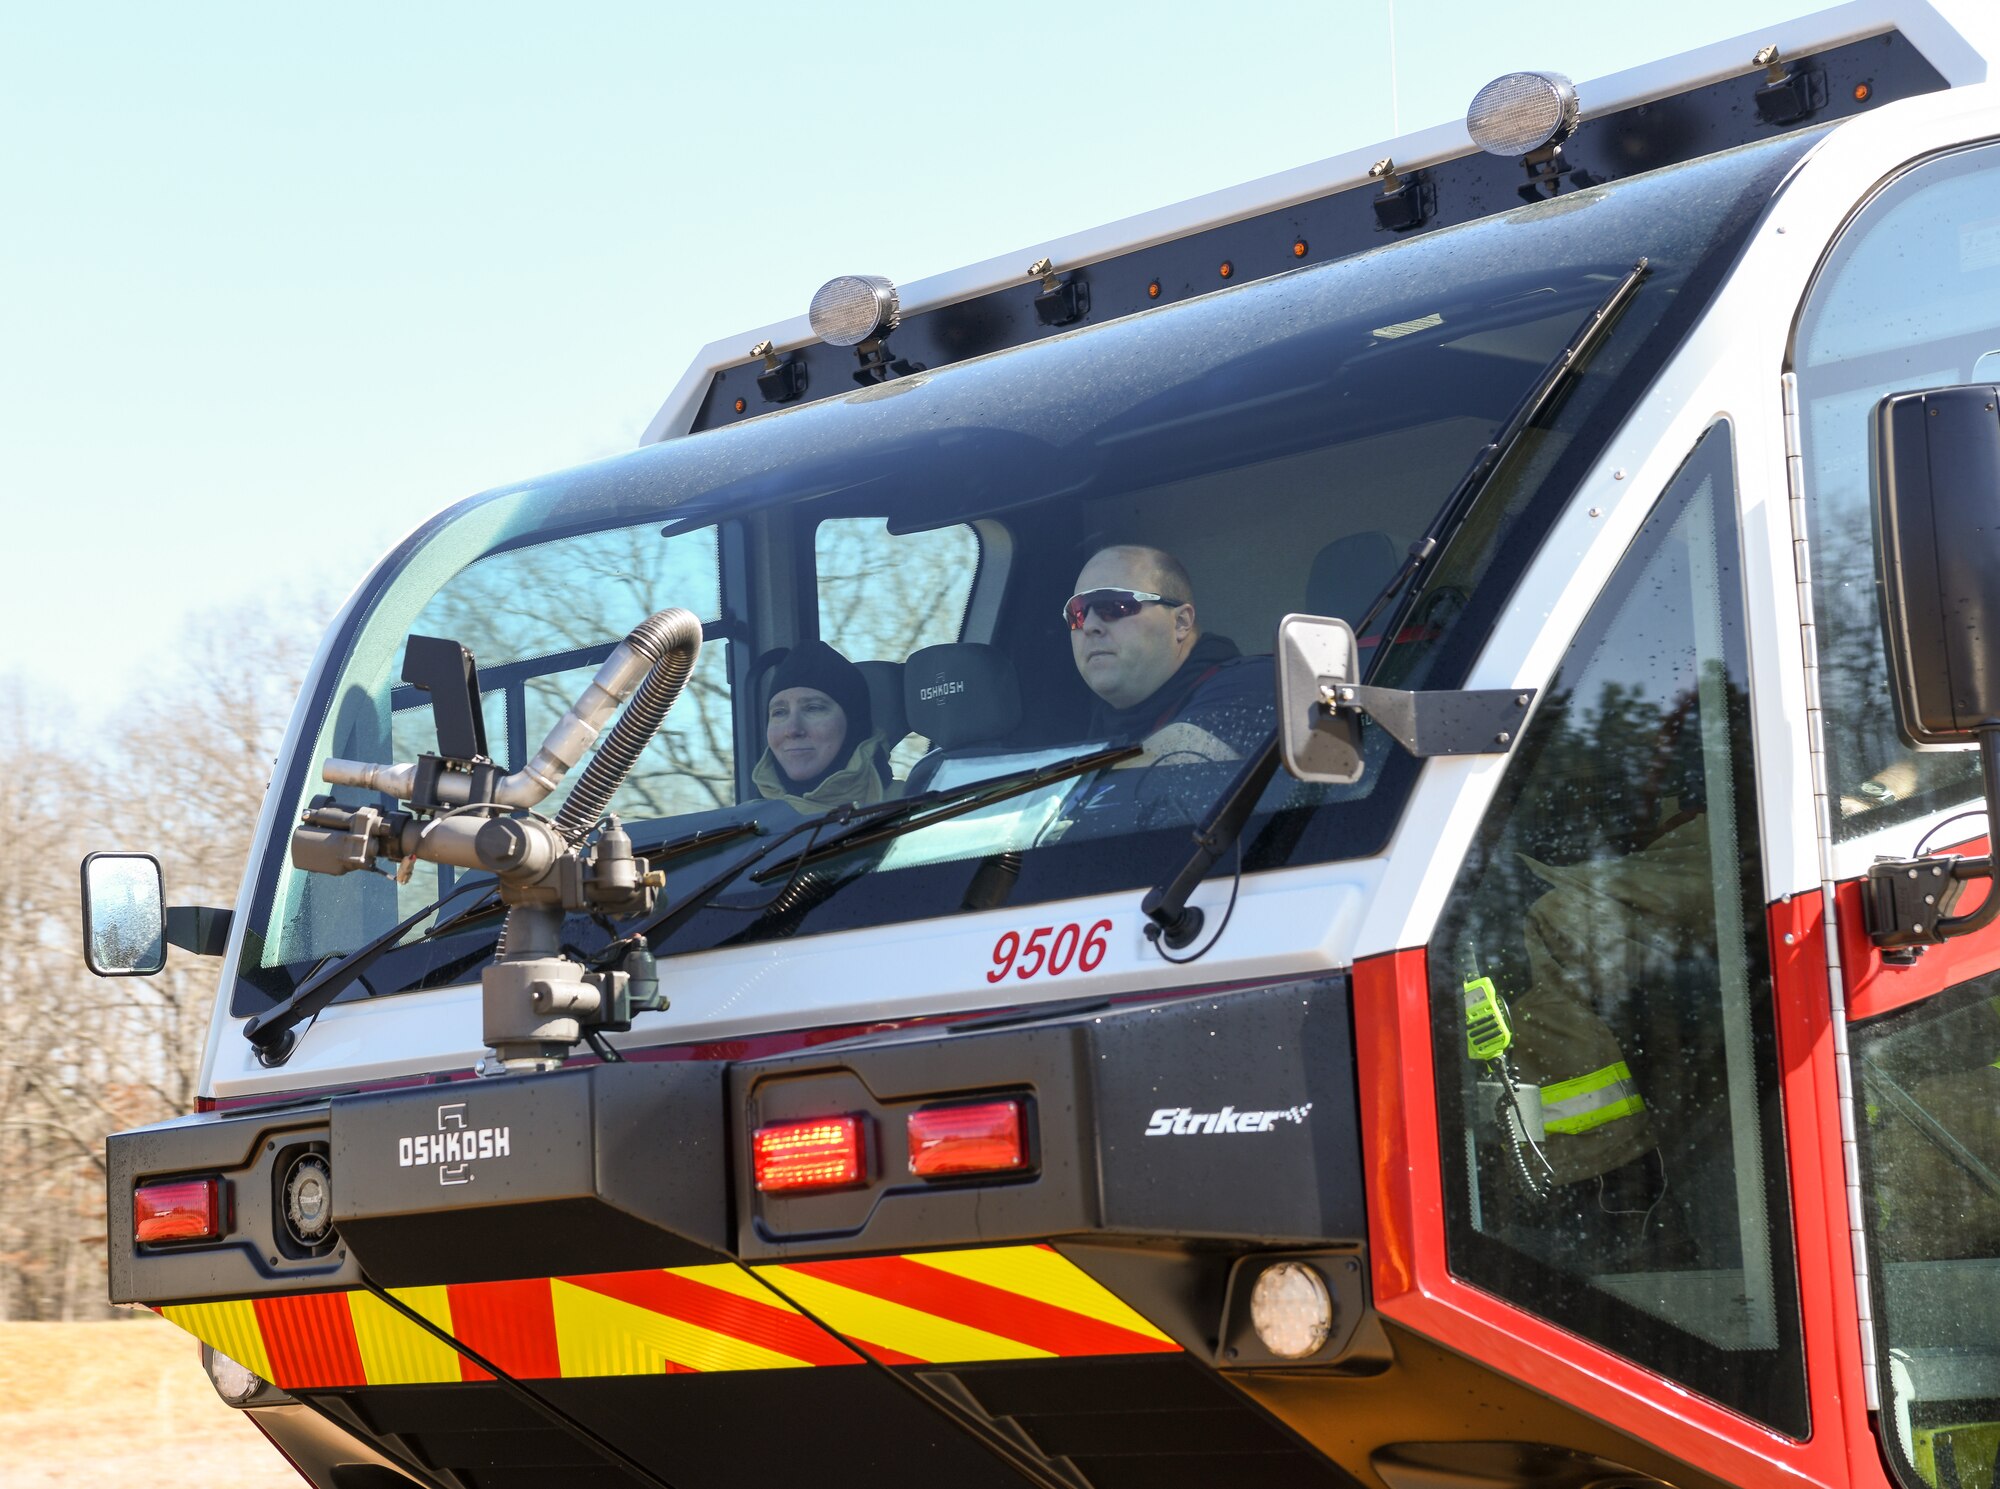 Whit Ross and Chief Master Sgt. Cirricione seen through windshield of firefighting vehicle